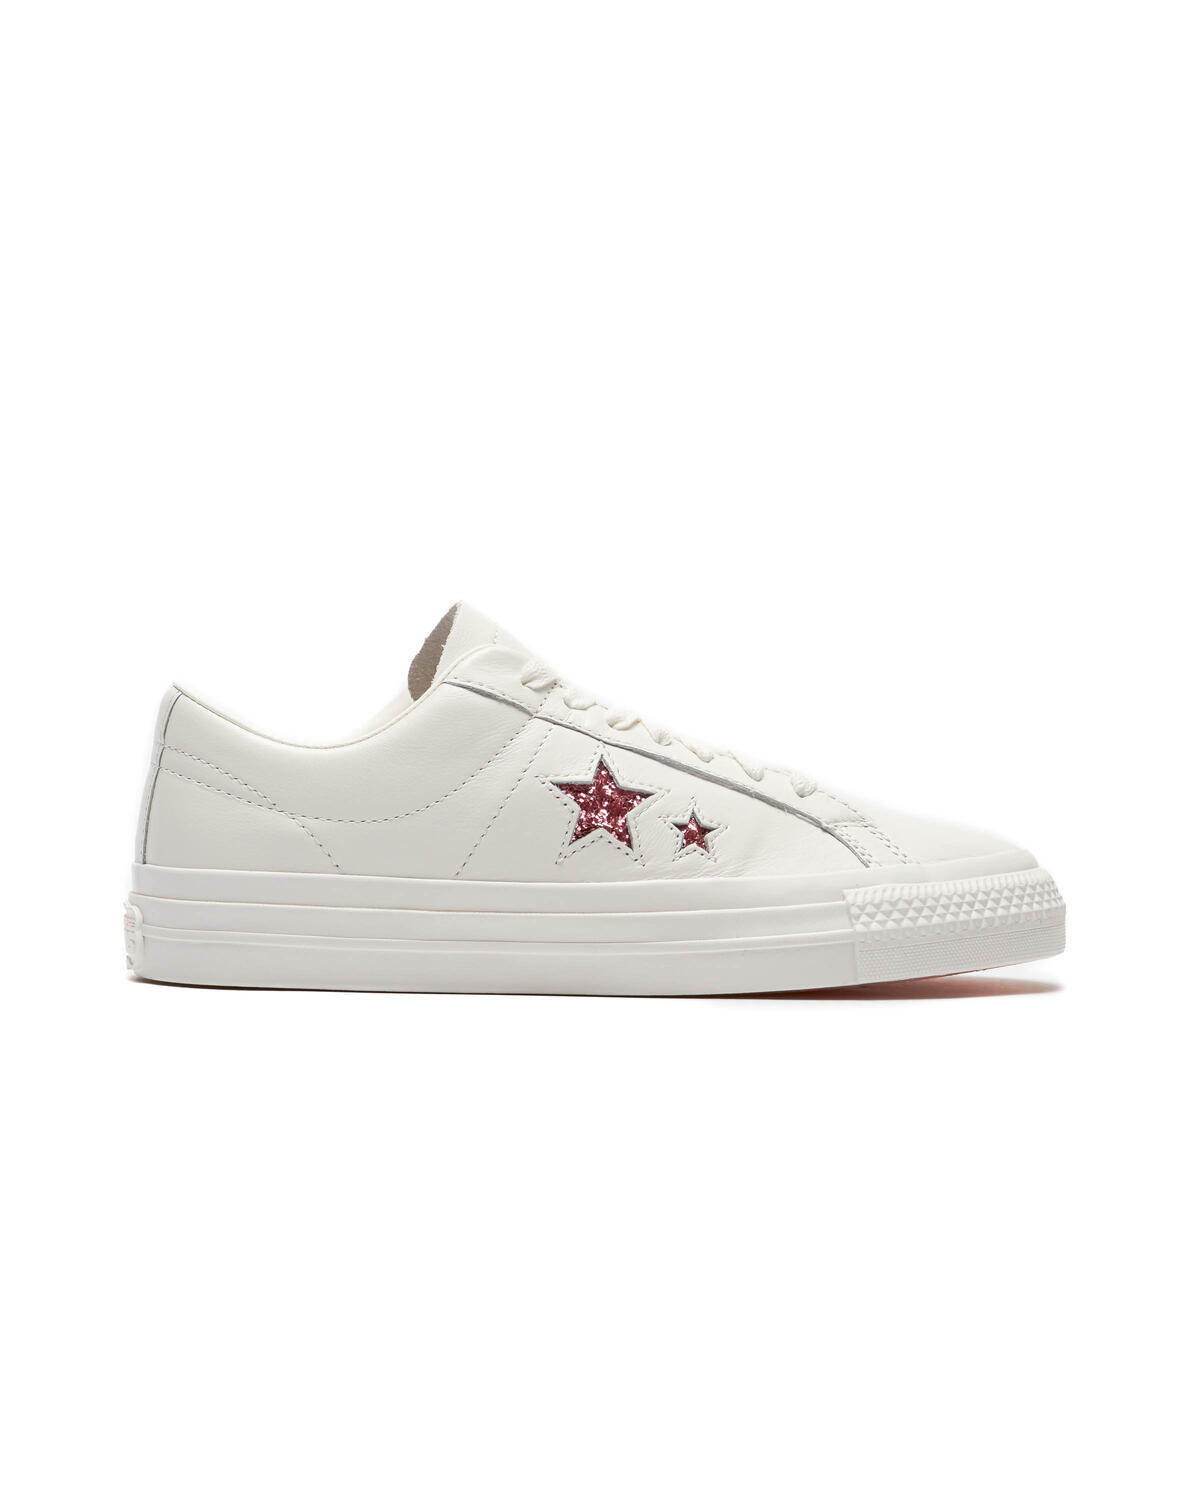 Converse One Star Leather Sneakers In White, 58% OFF